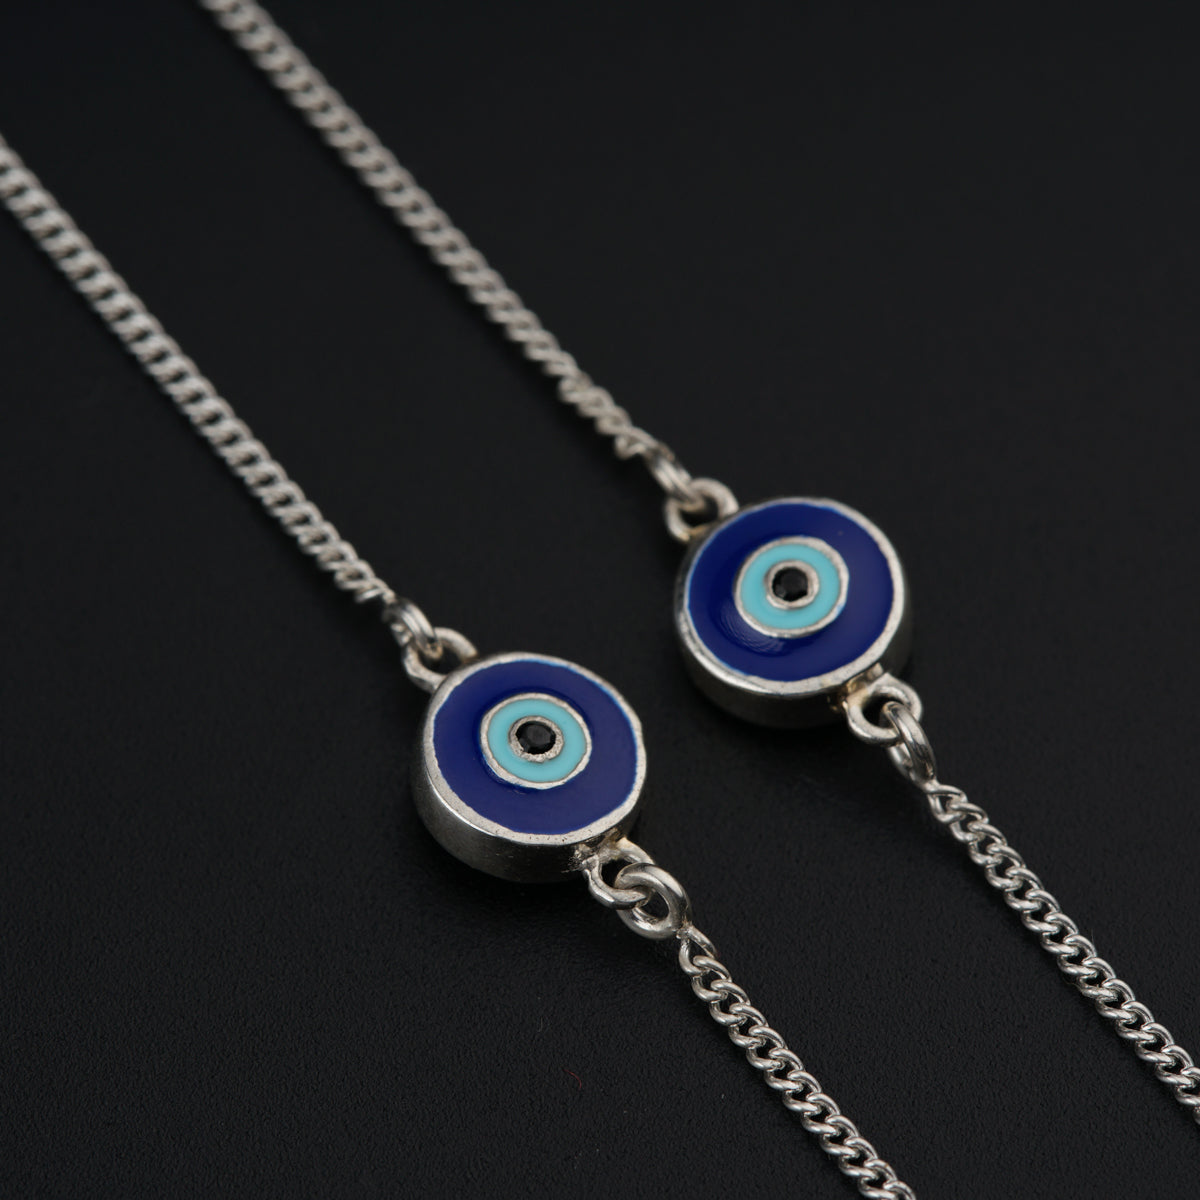 a pair of blue evil eye earrings on a chain